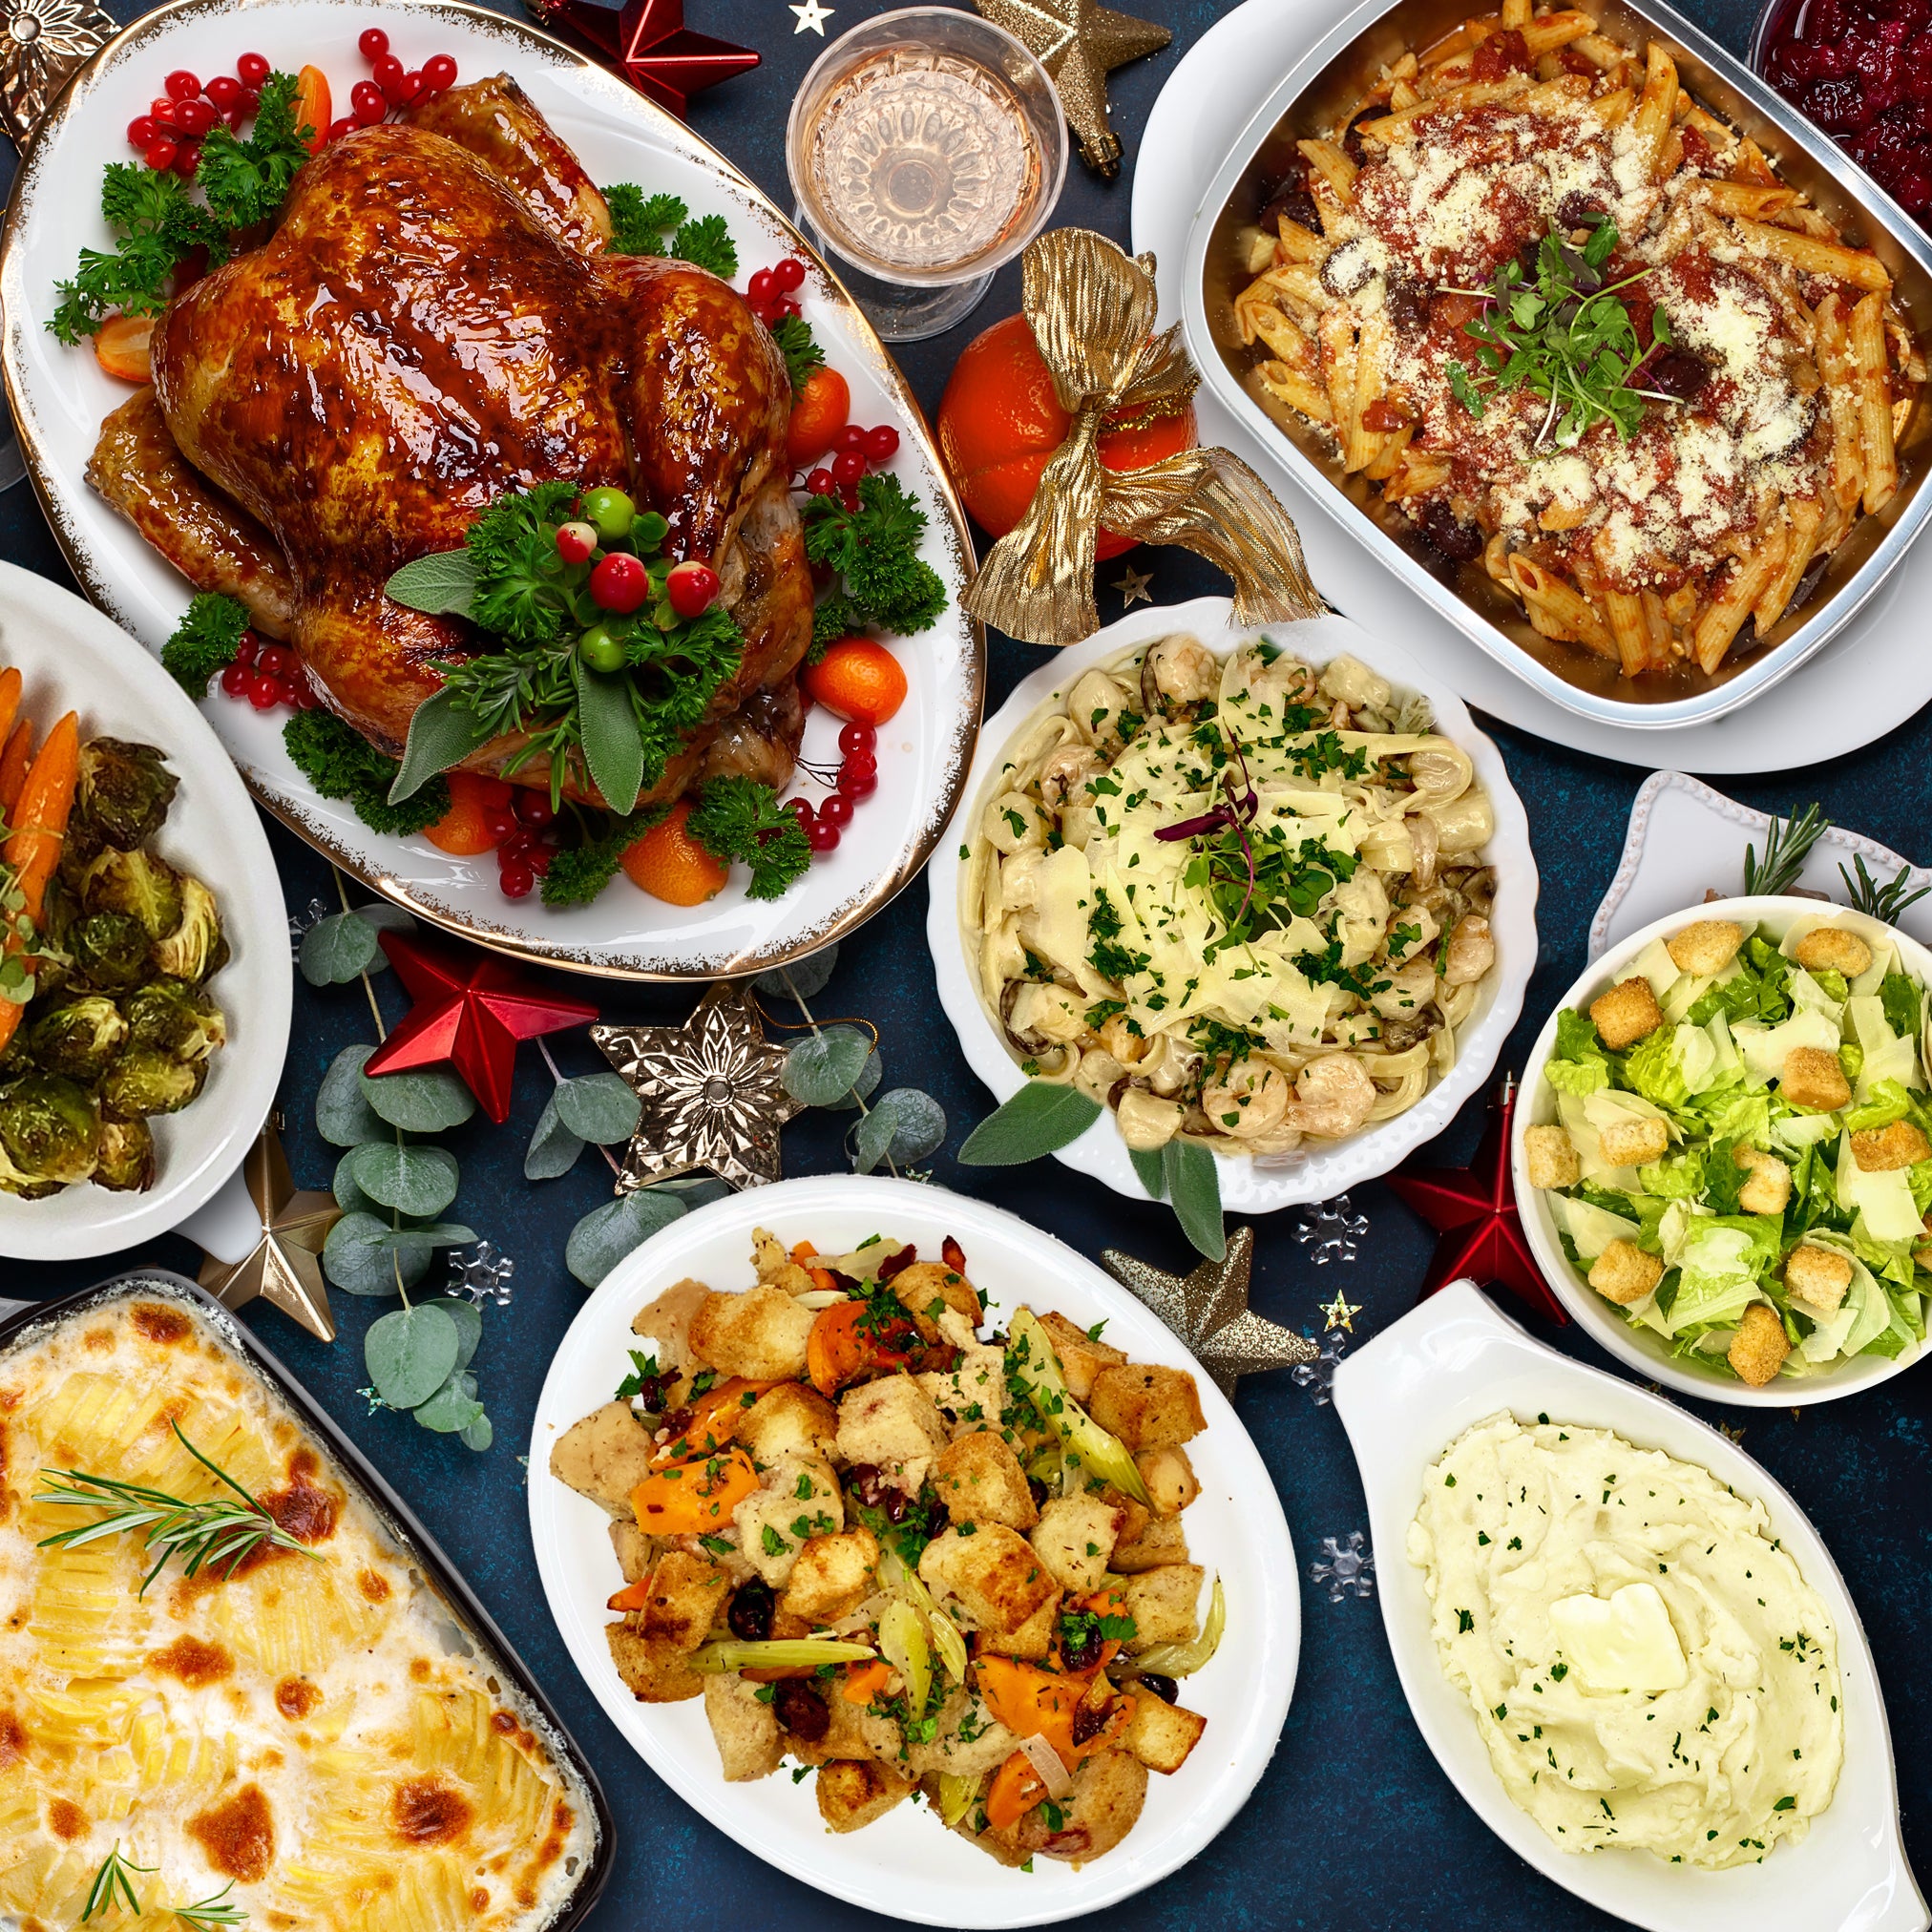 Classic Thanksgiving | Holiday Catering Package for Small Groups (Serves 4)